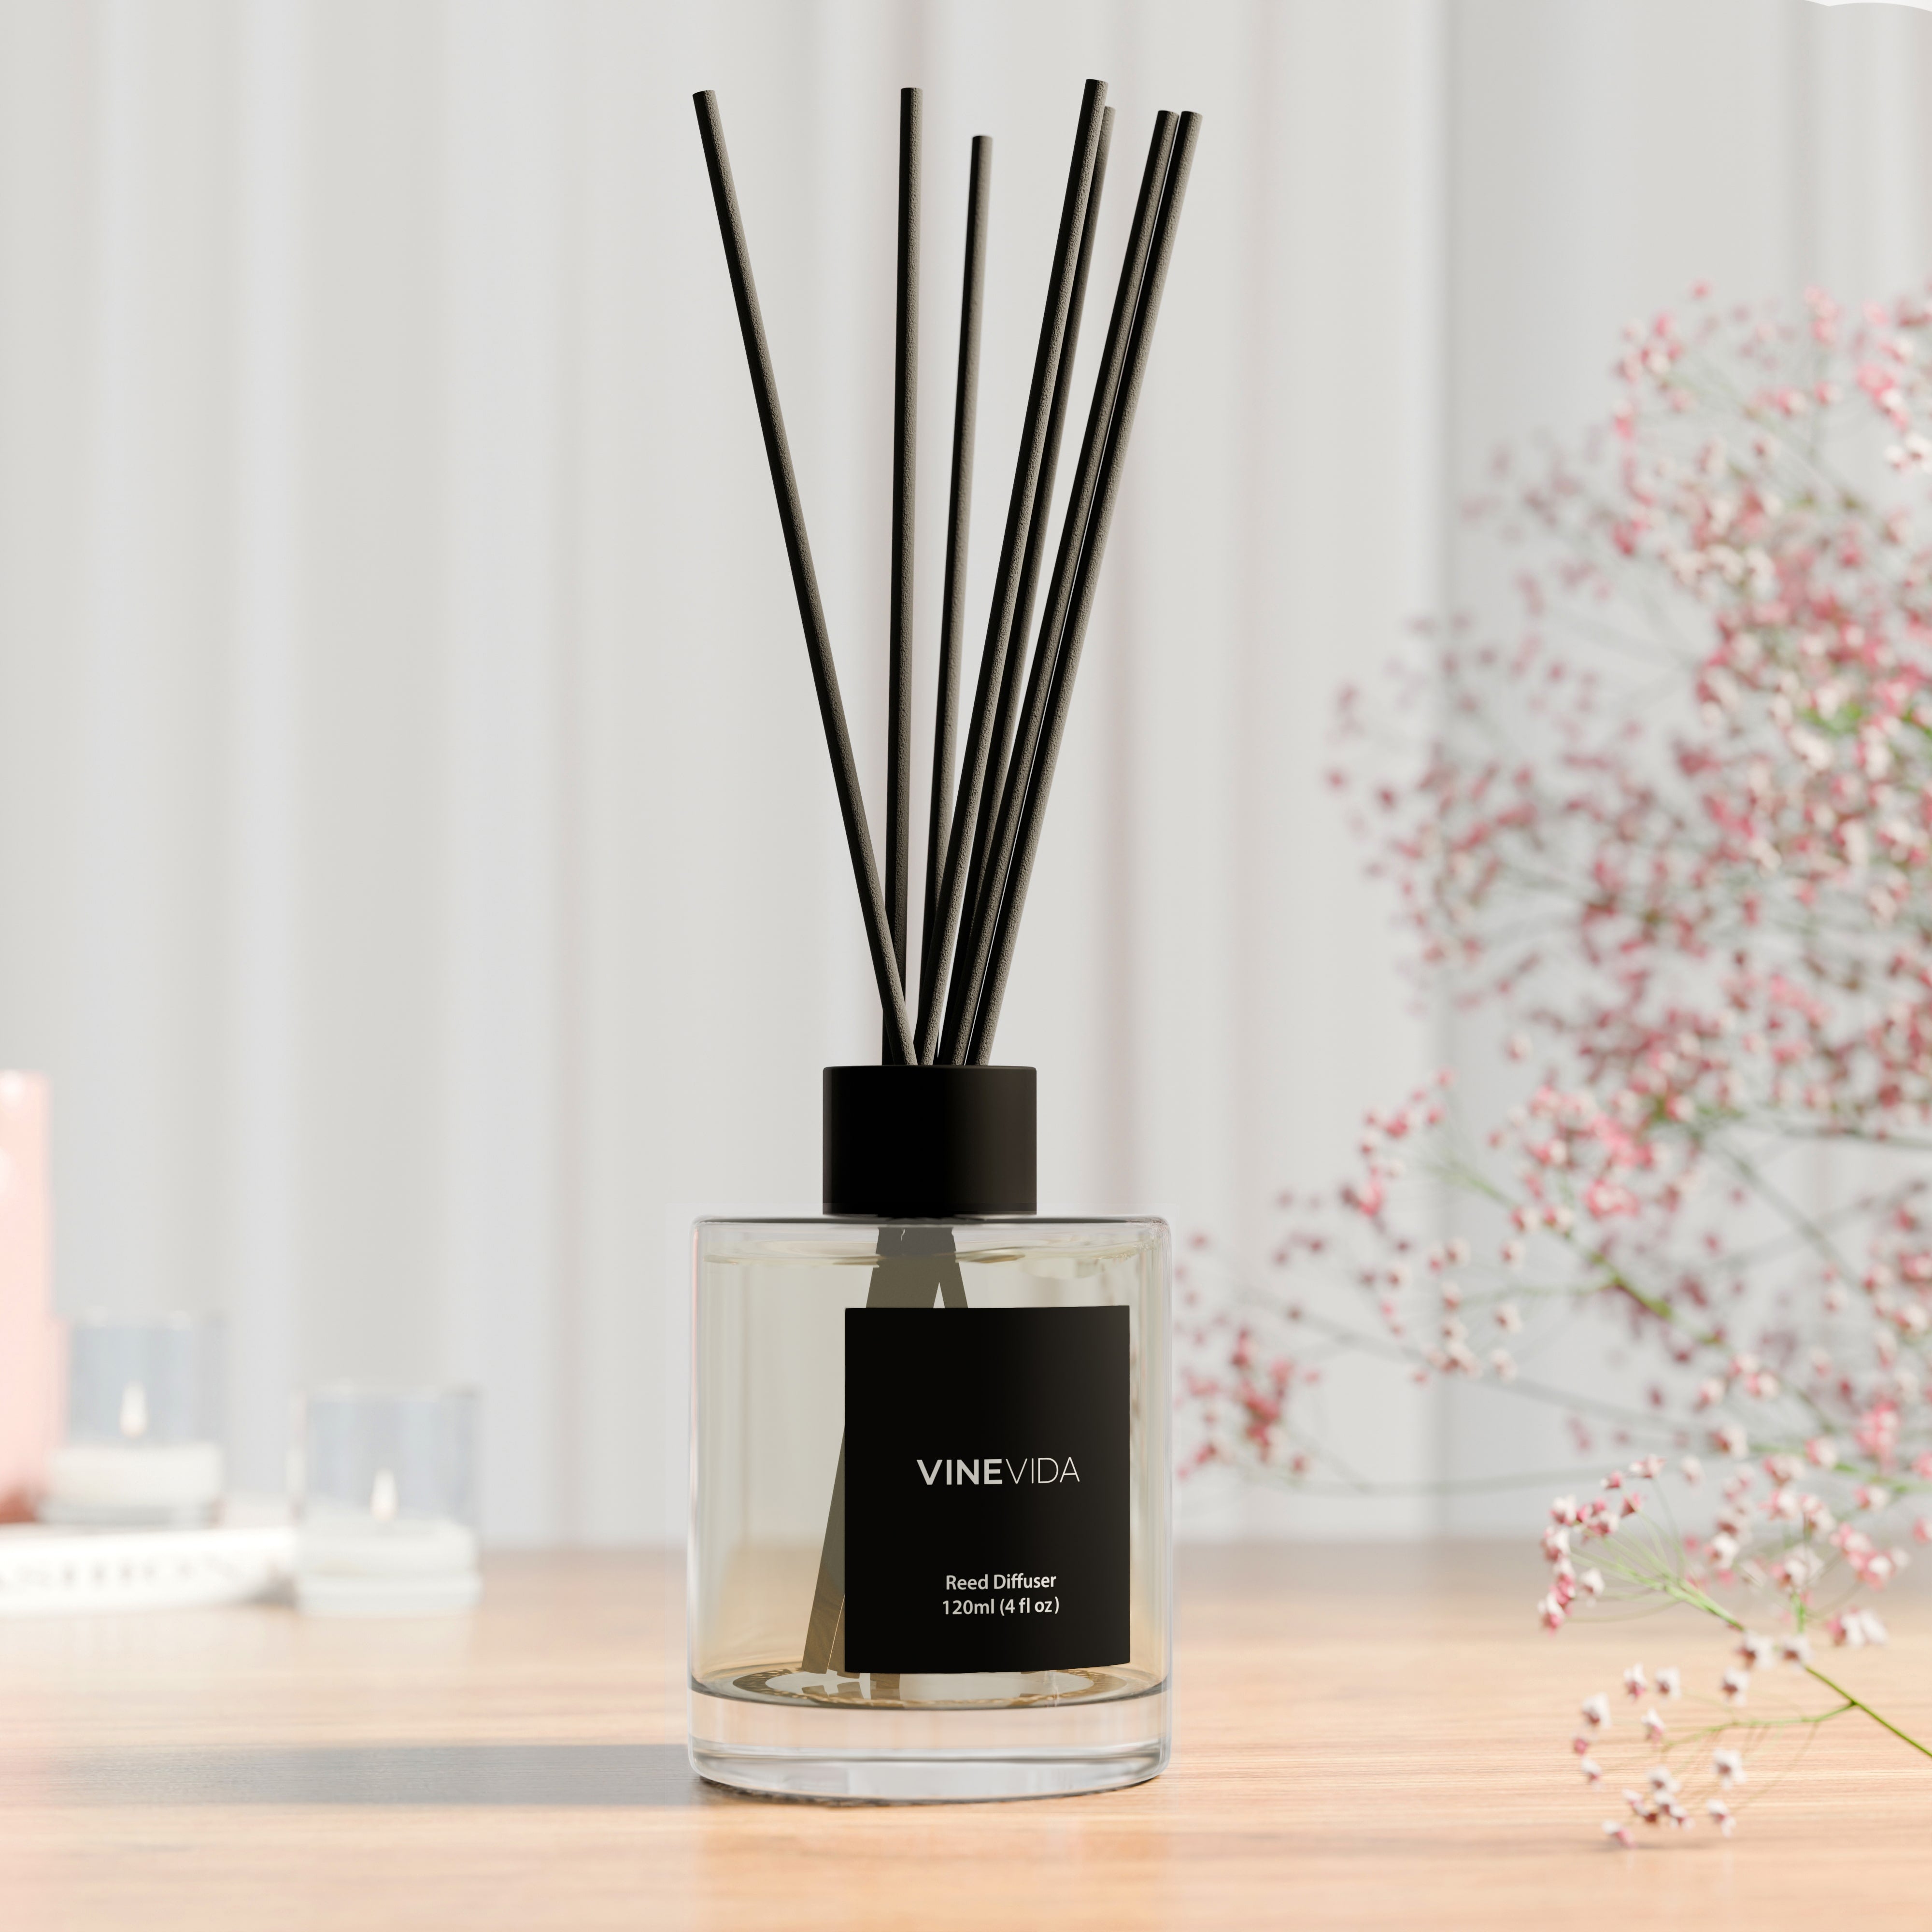 NO. 1107 Reed Diffuser - Inspired by: Cashmere Glow by Bath & Body Works